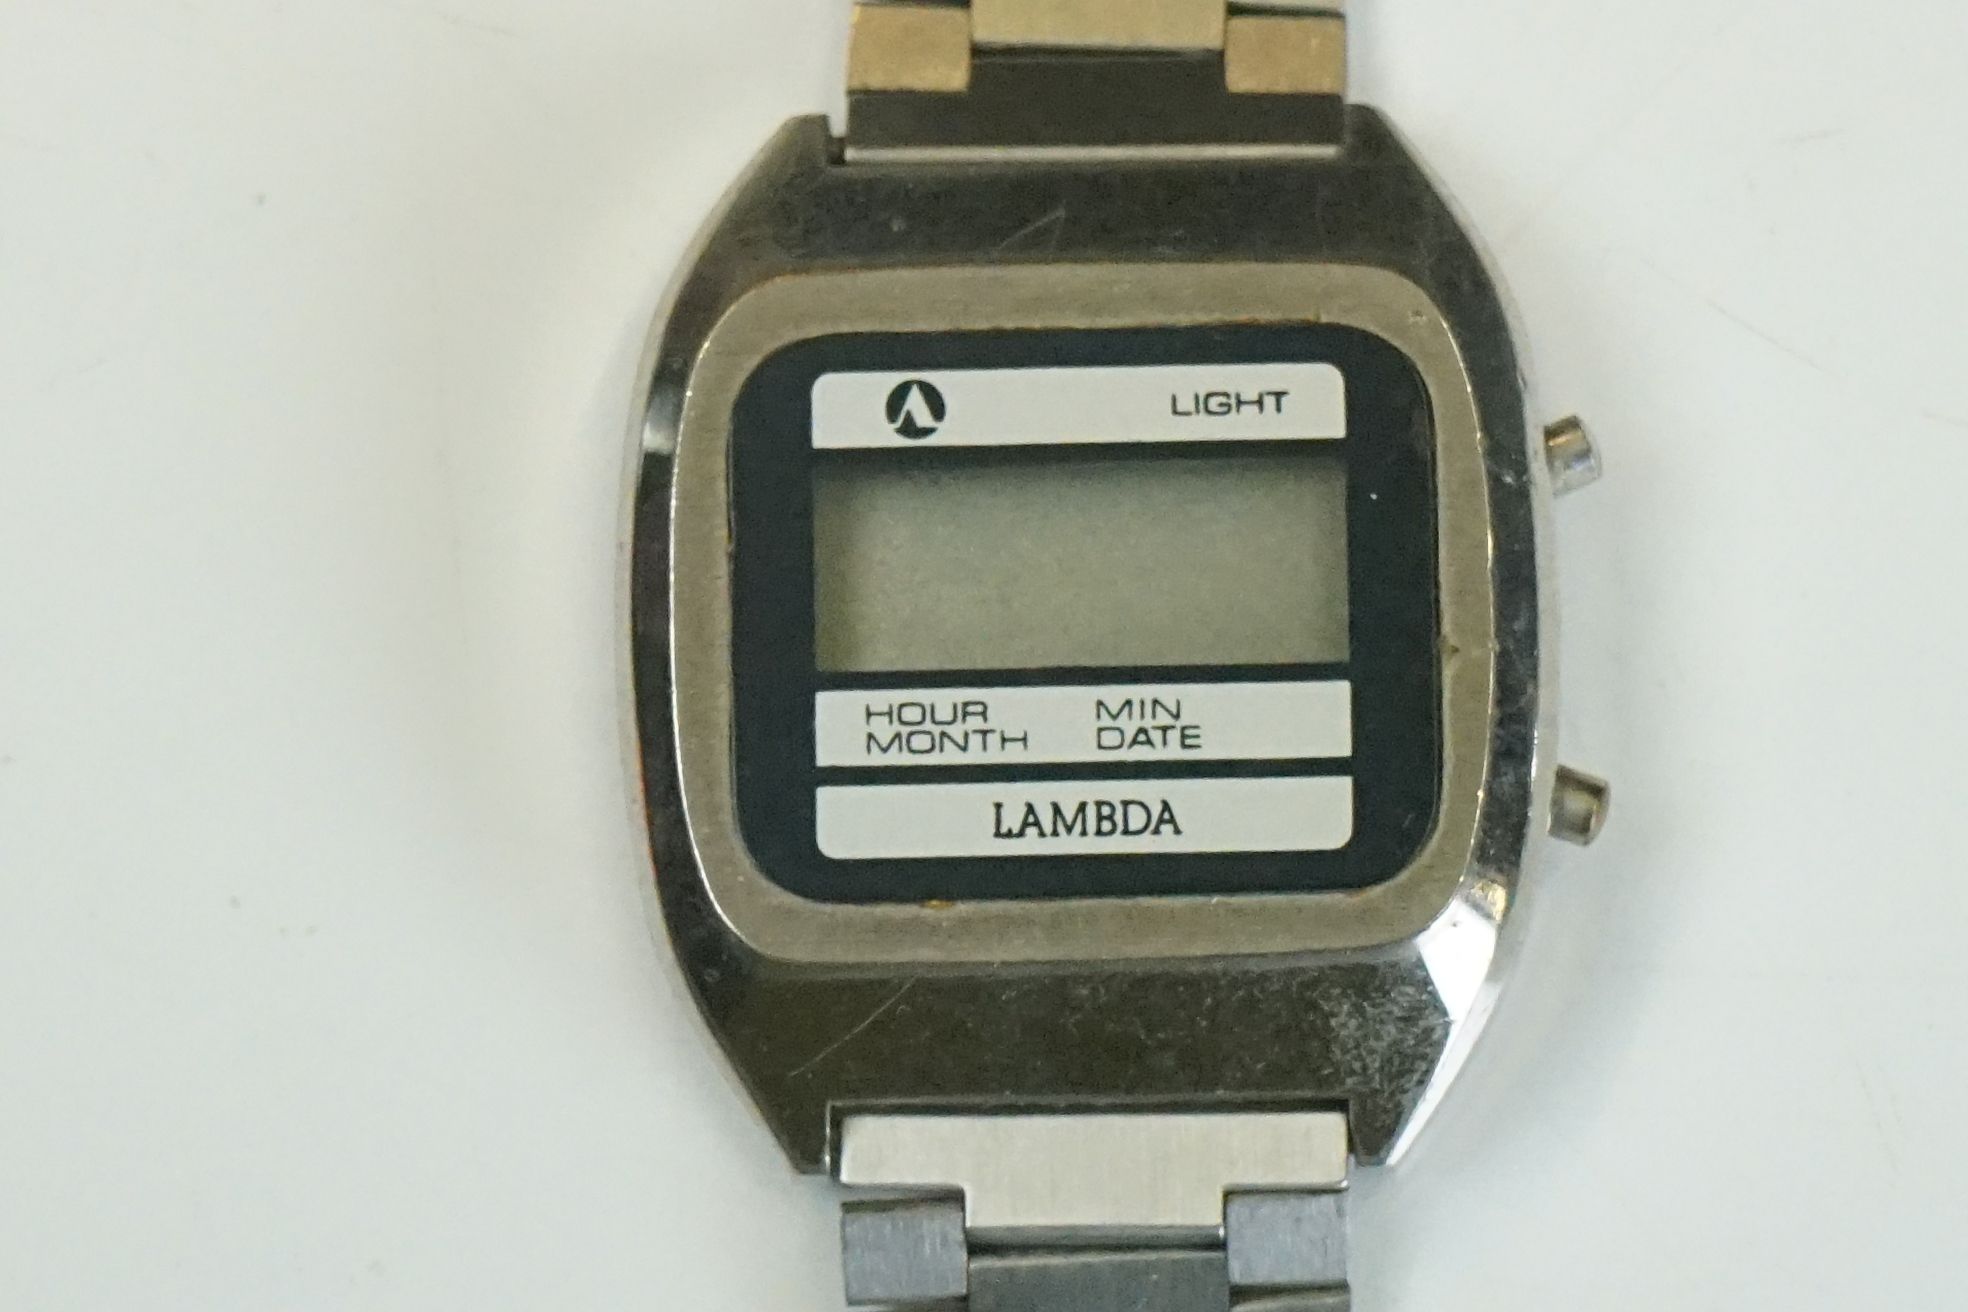 Collection of LCD Watches including Seiko, Casio, Lambda, etc - Image 5 of 14